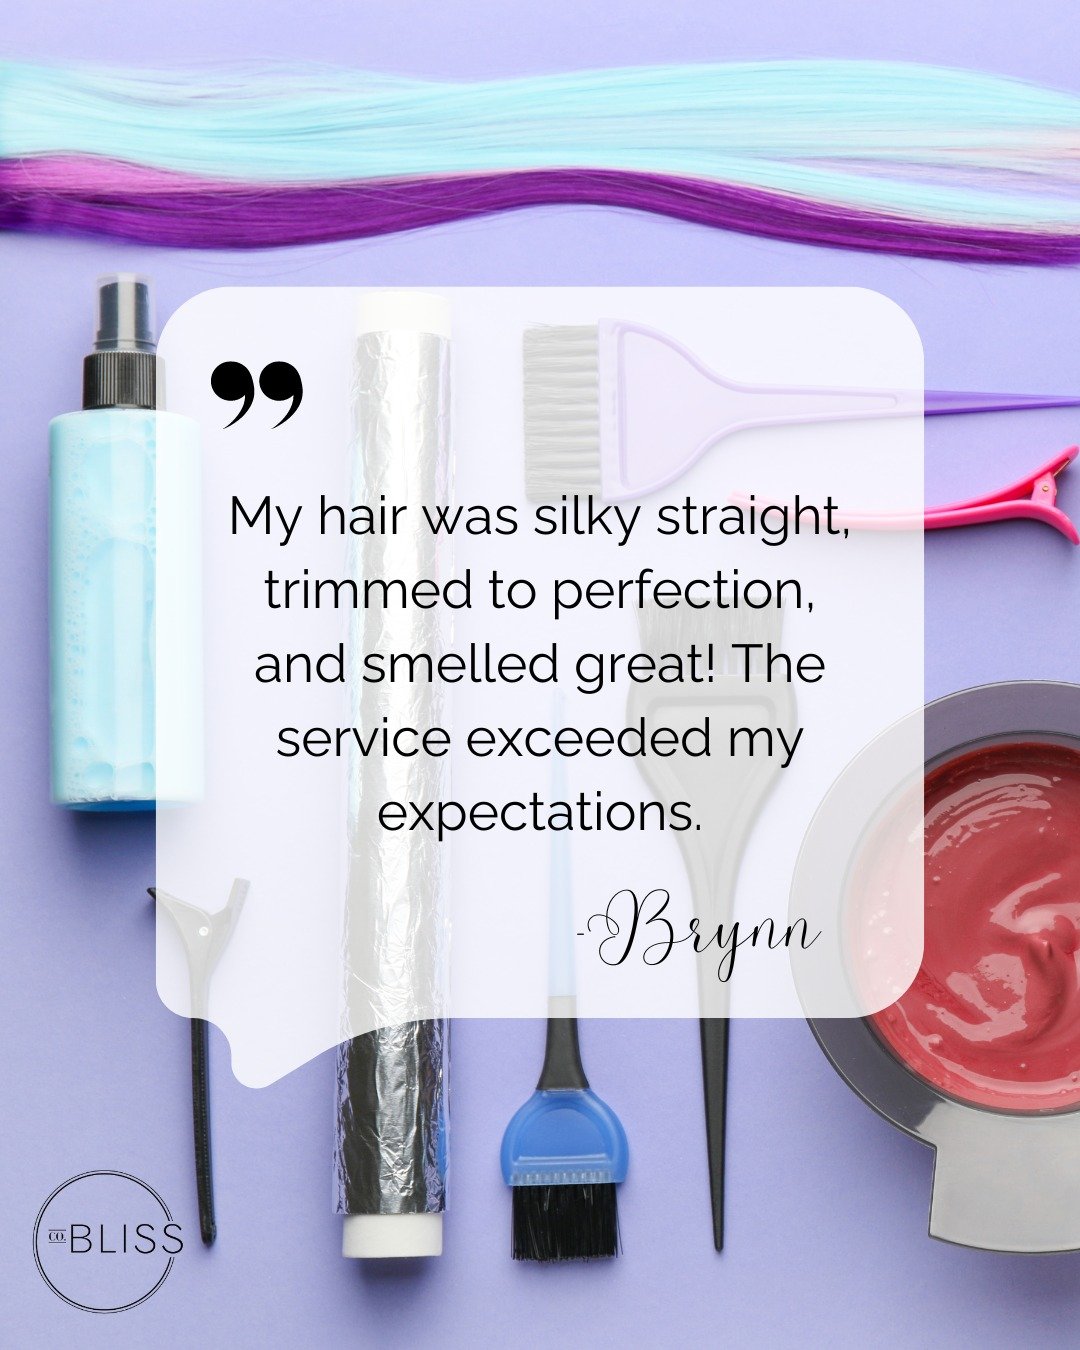 🪻 Thank you for your kind review Brynn! 🪻

&quot;I discovered Company Bliss from the Cezanne website locator as I wanted to have my naturally curly hair straightened without toxic chemicals. 

As a first-time client, salon owner Laurie Johnson call